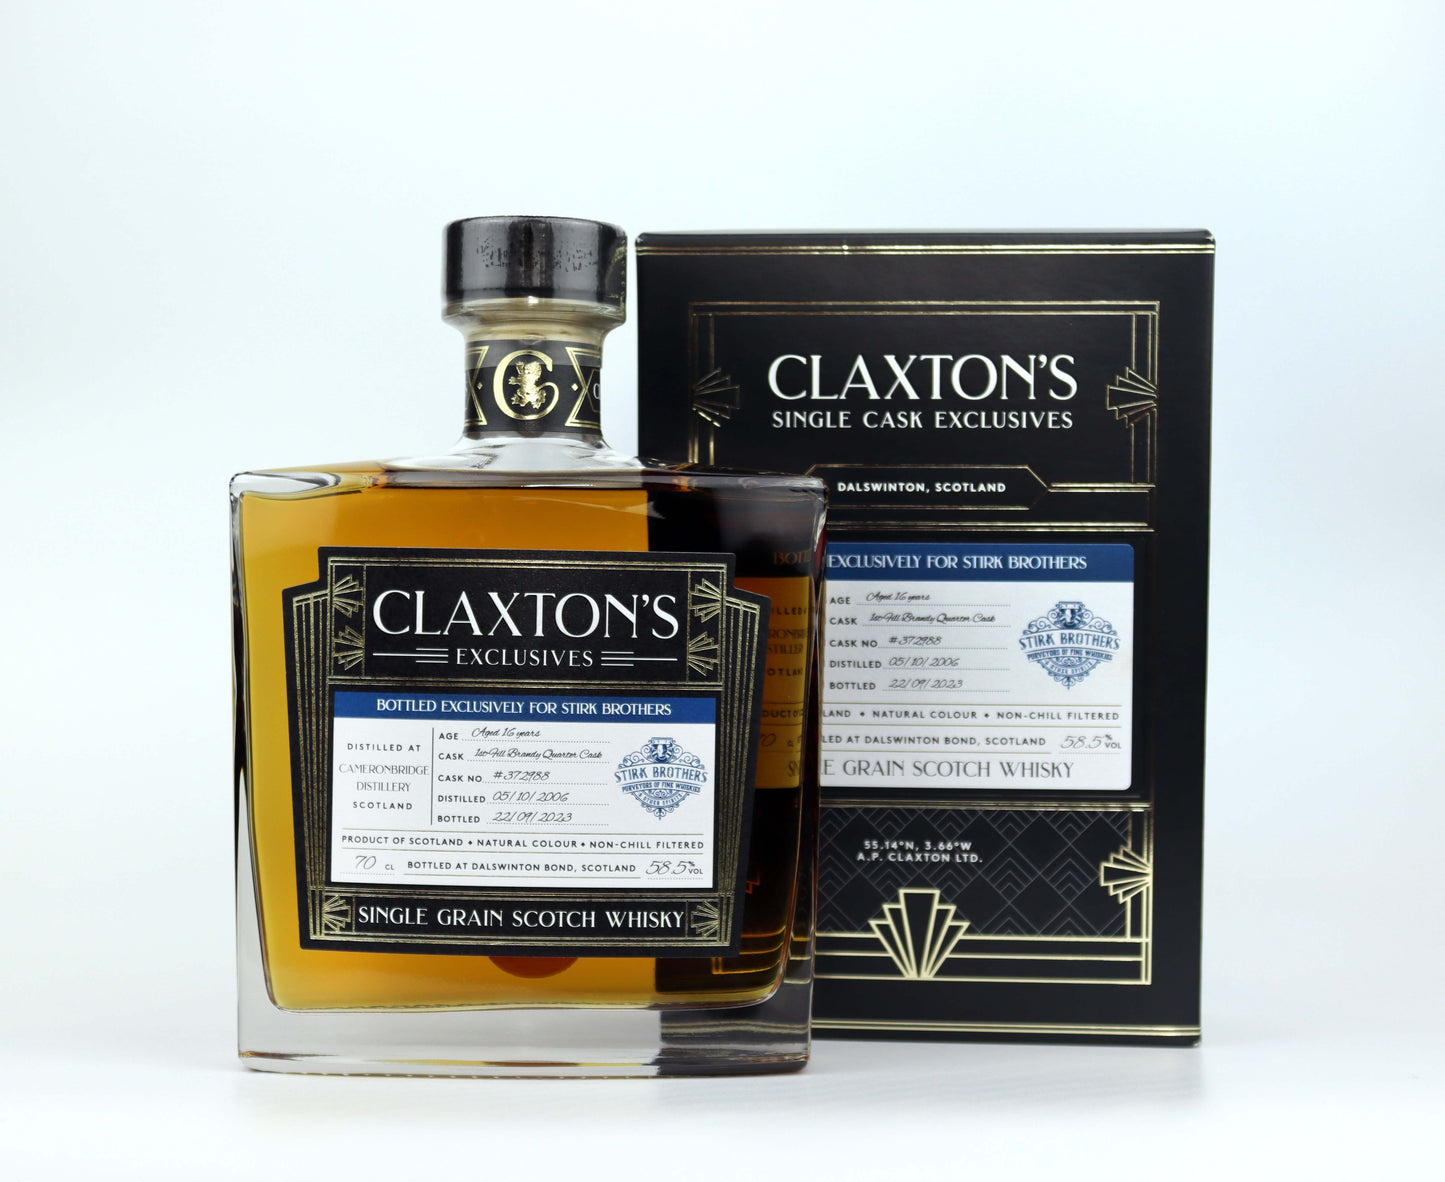 Stirk's Selection - Claxton's - Cameronbridge - Aged 16 Years - Single Grain Scotch Whisky is